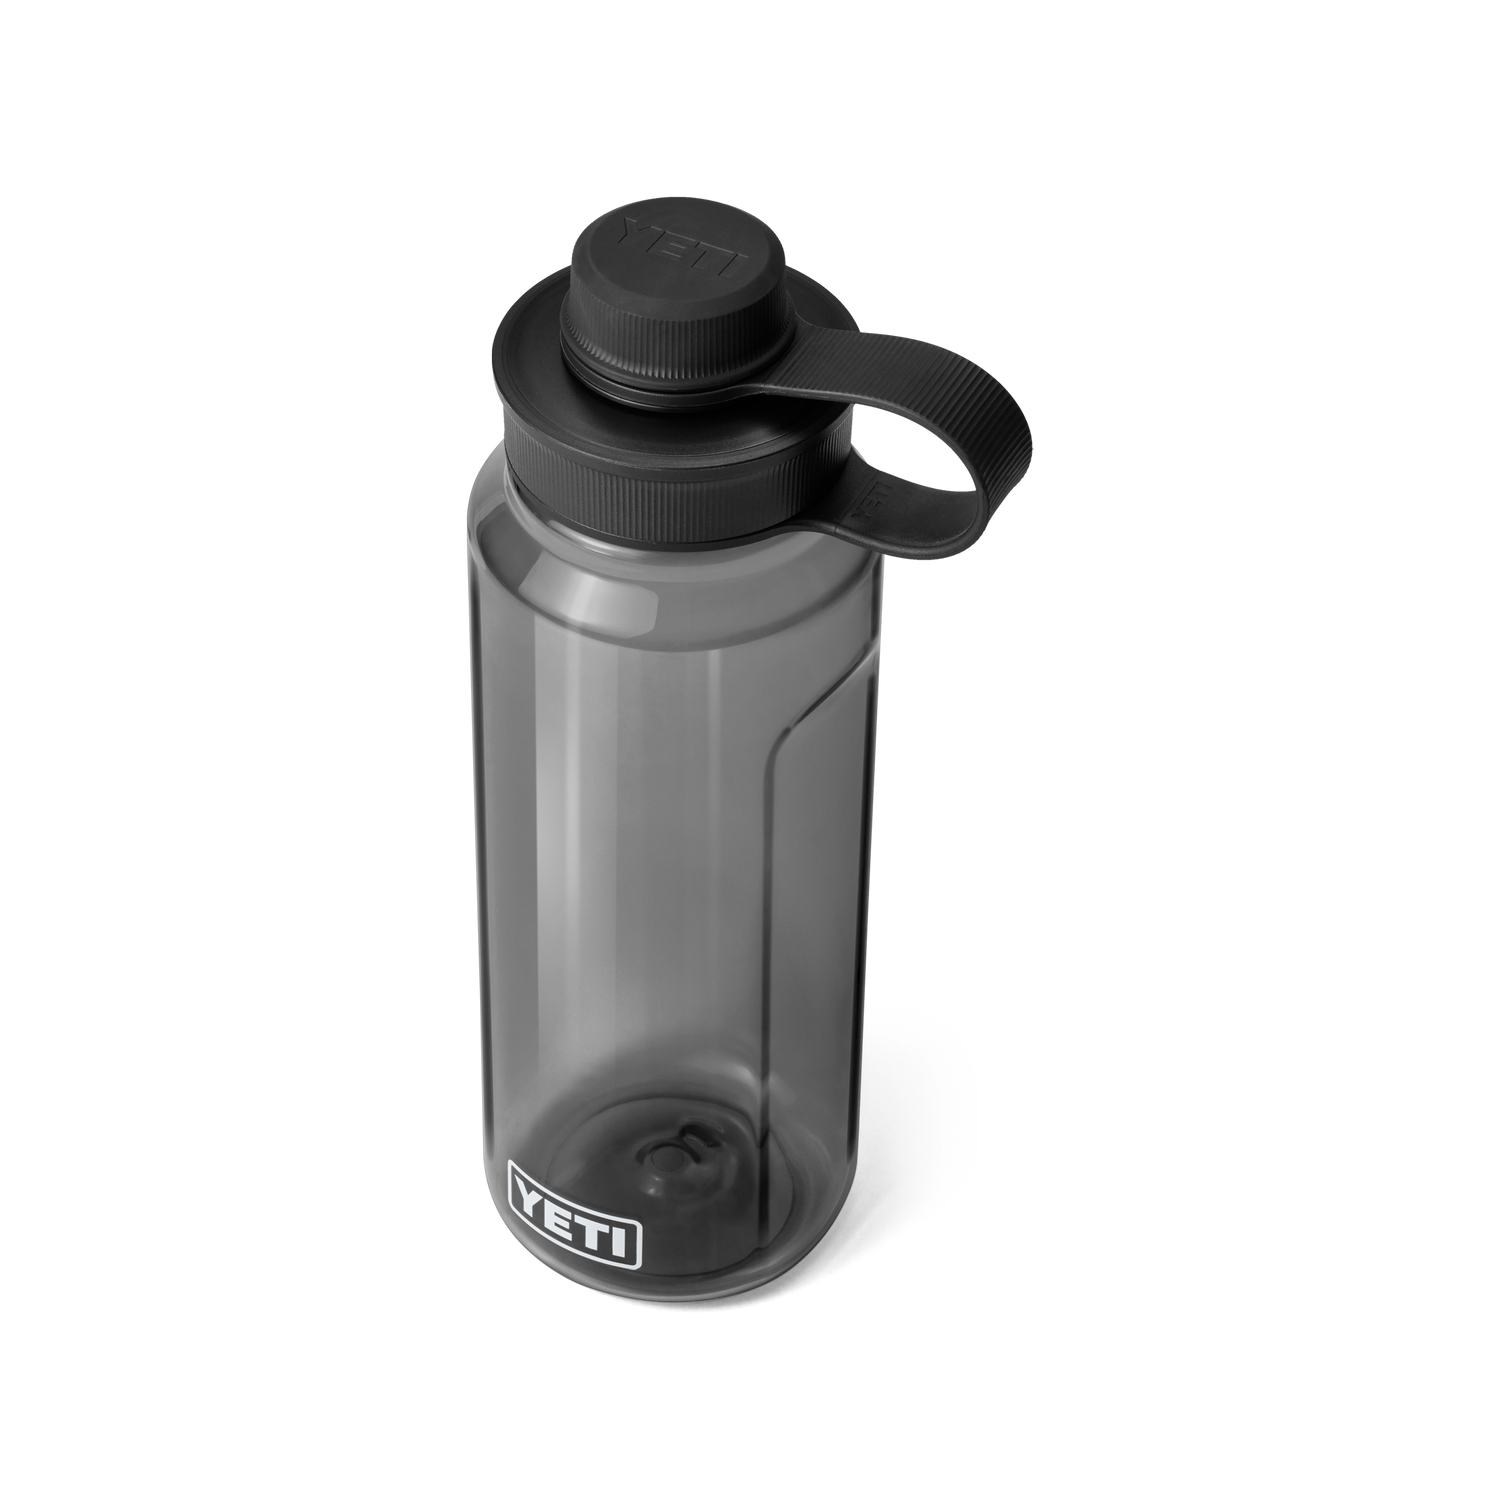 YETI_Wholesale_Drinkware_Yonder_Tether_Accs_1L_Charcoal_3qtr_Closed_0818_B_2400x2400.png